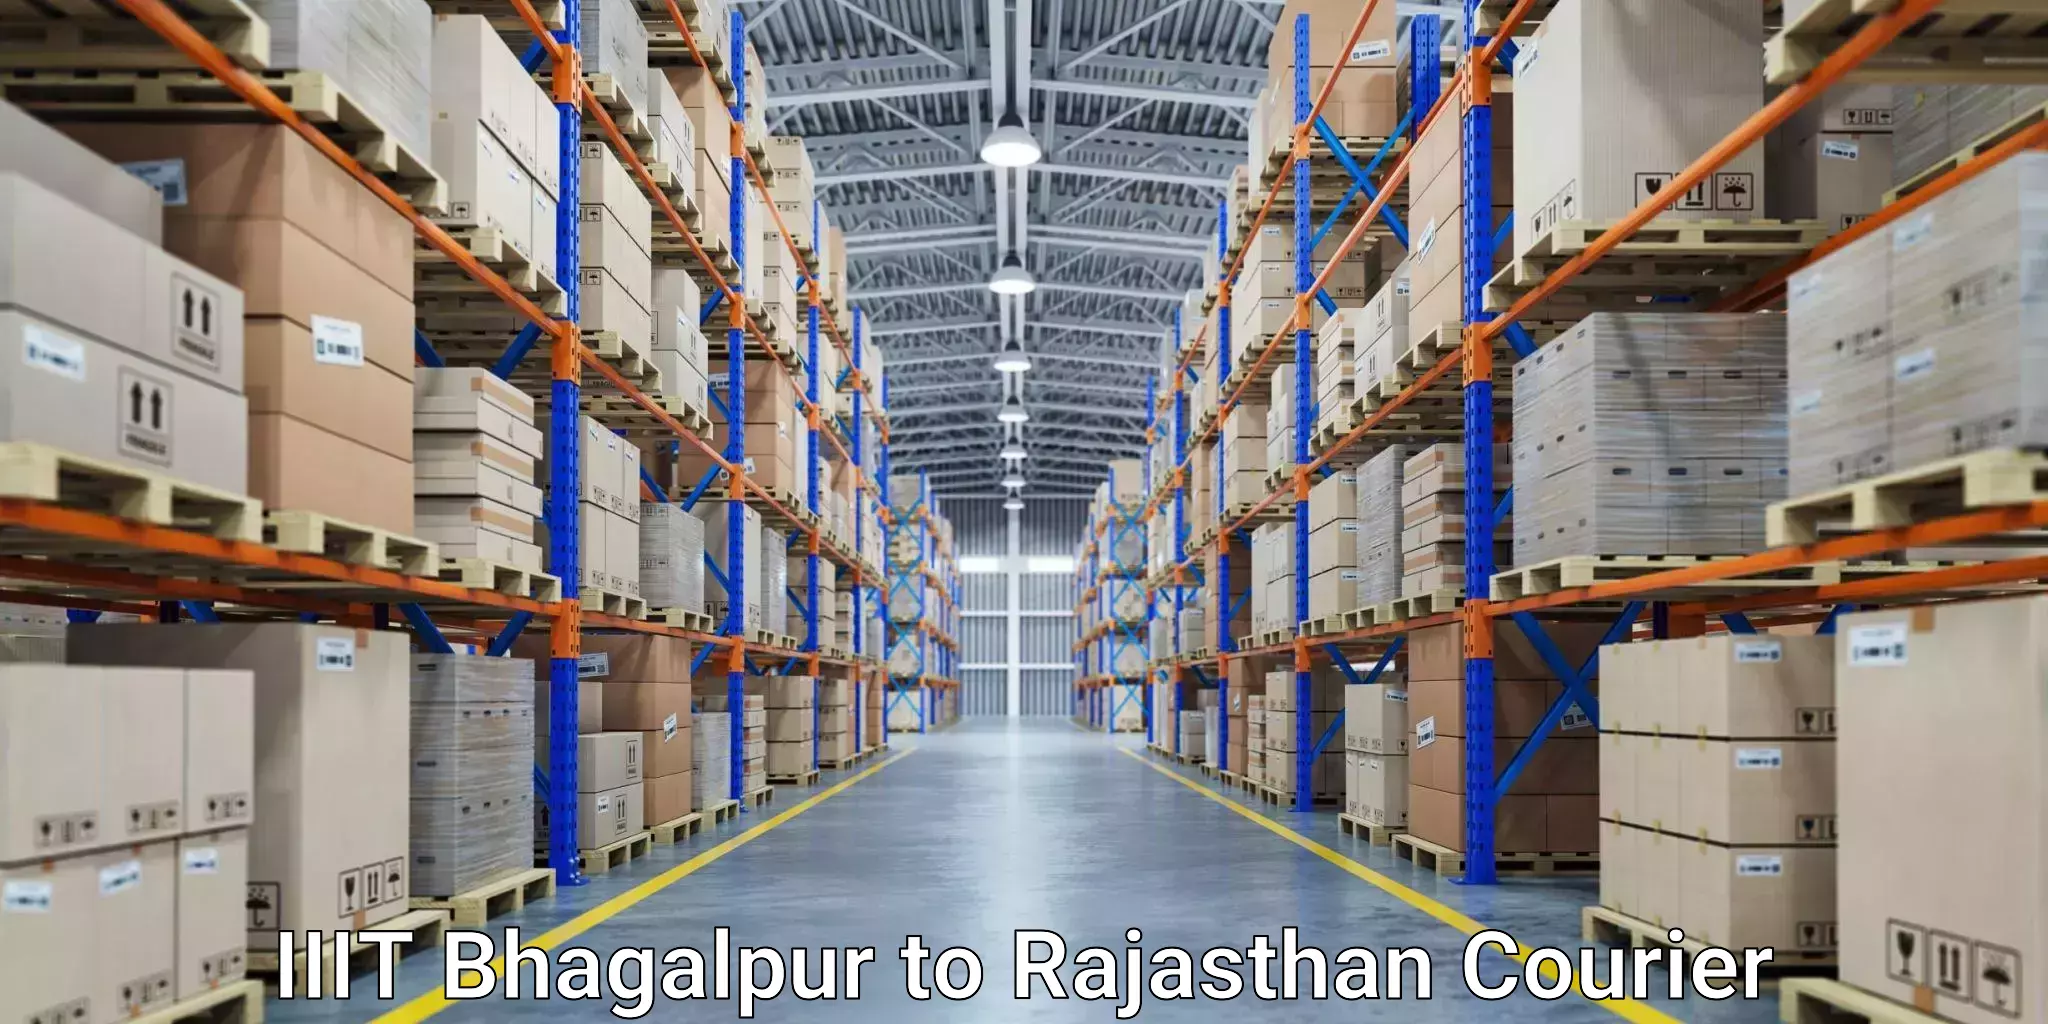 Express mail solutions IIIT Bhagalpur to Rajasthan